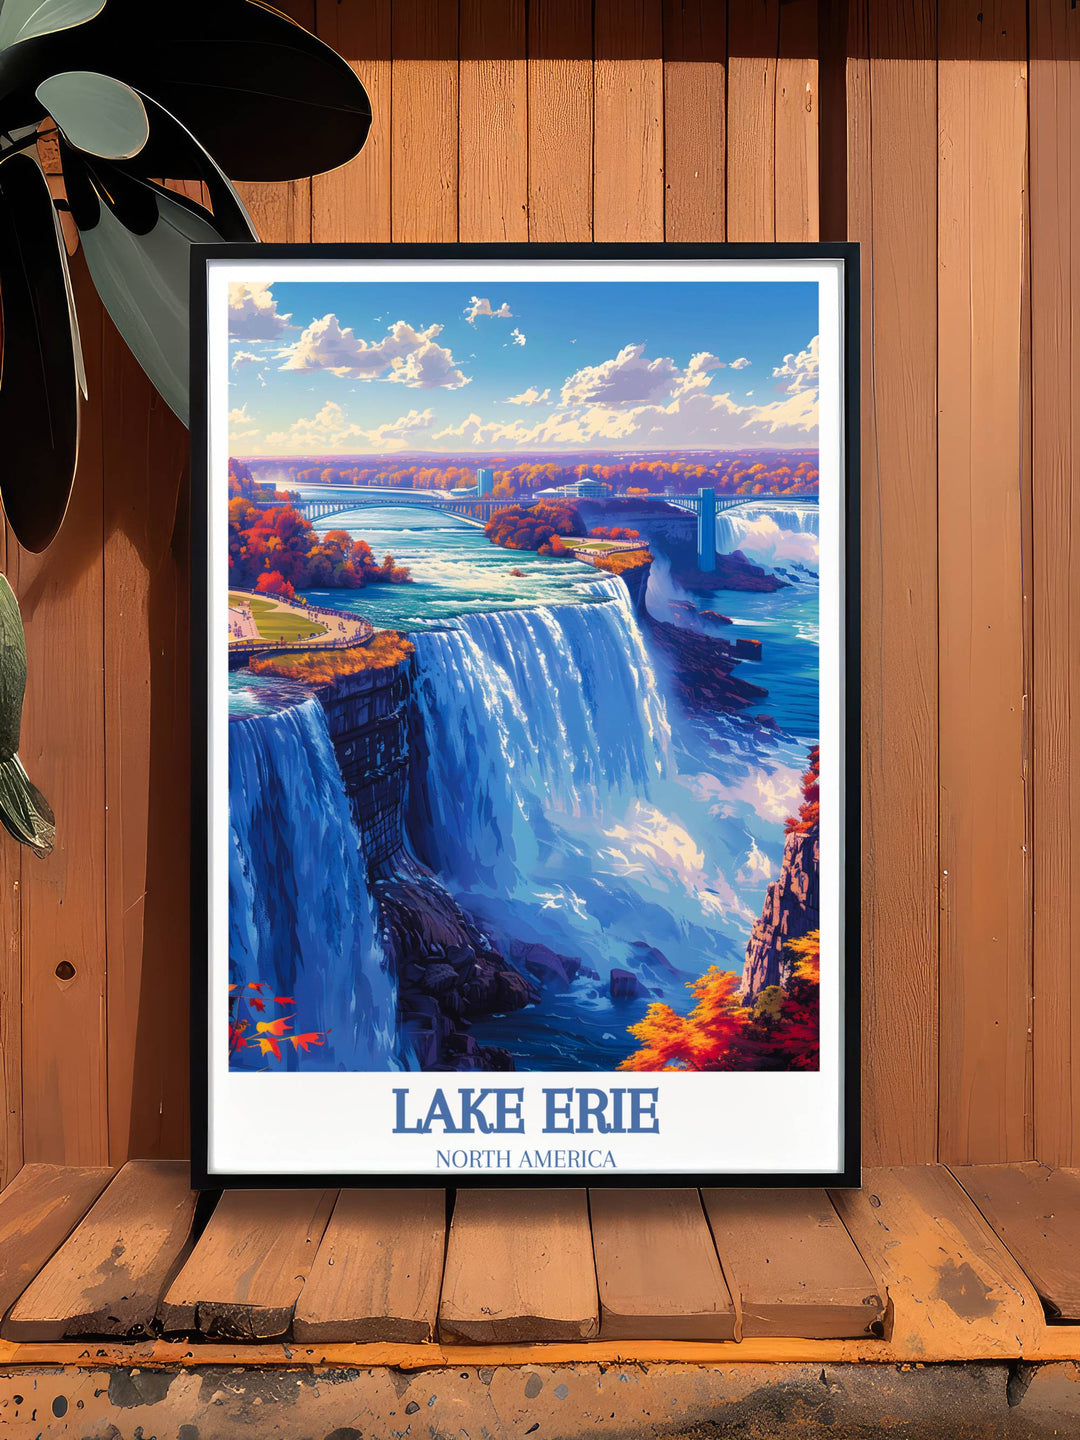 Christmas gift of a custom Lake Erie artwork, personalized to capture the essence of the lake during the holiday season.